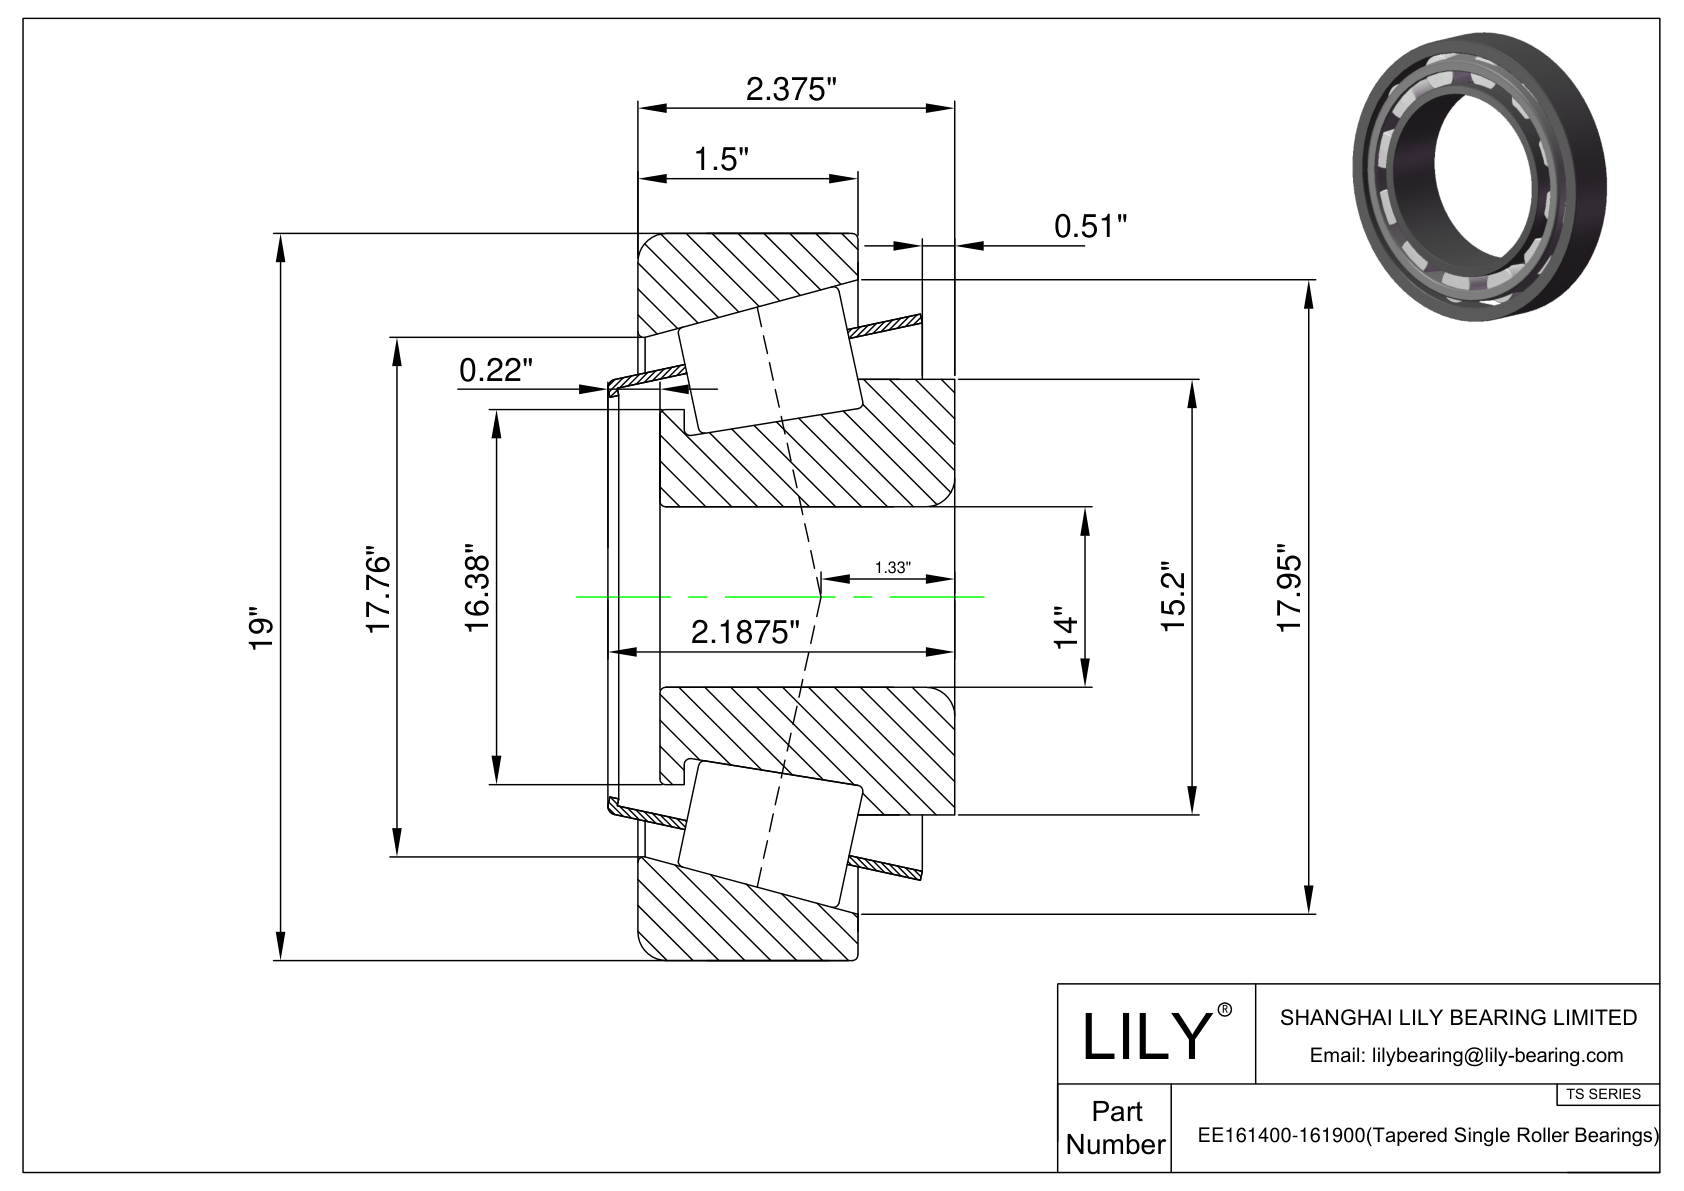 EE161400-161900 TS (Tapered Single Roller Bearings) (Imperial) cad drawing